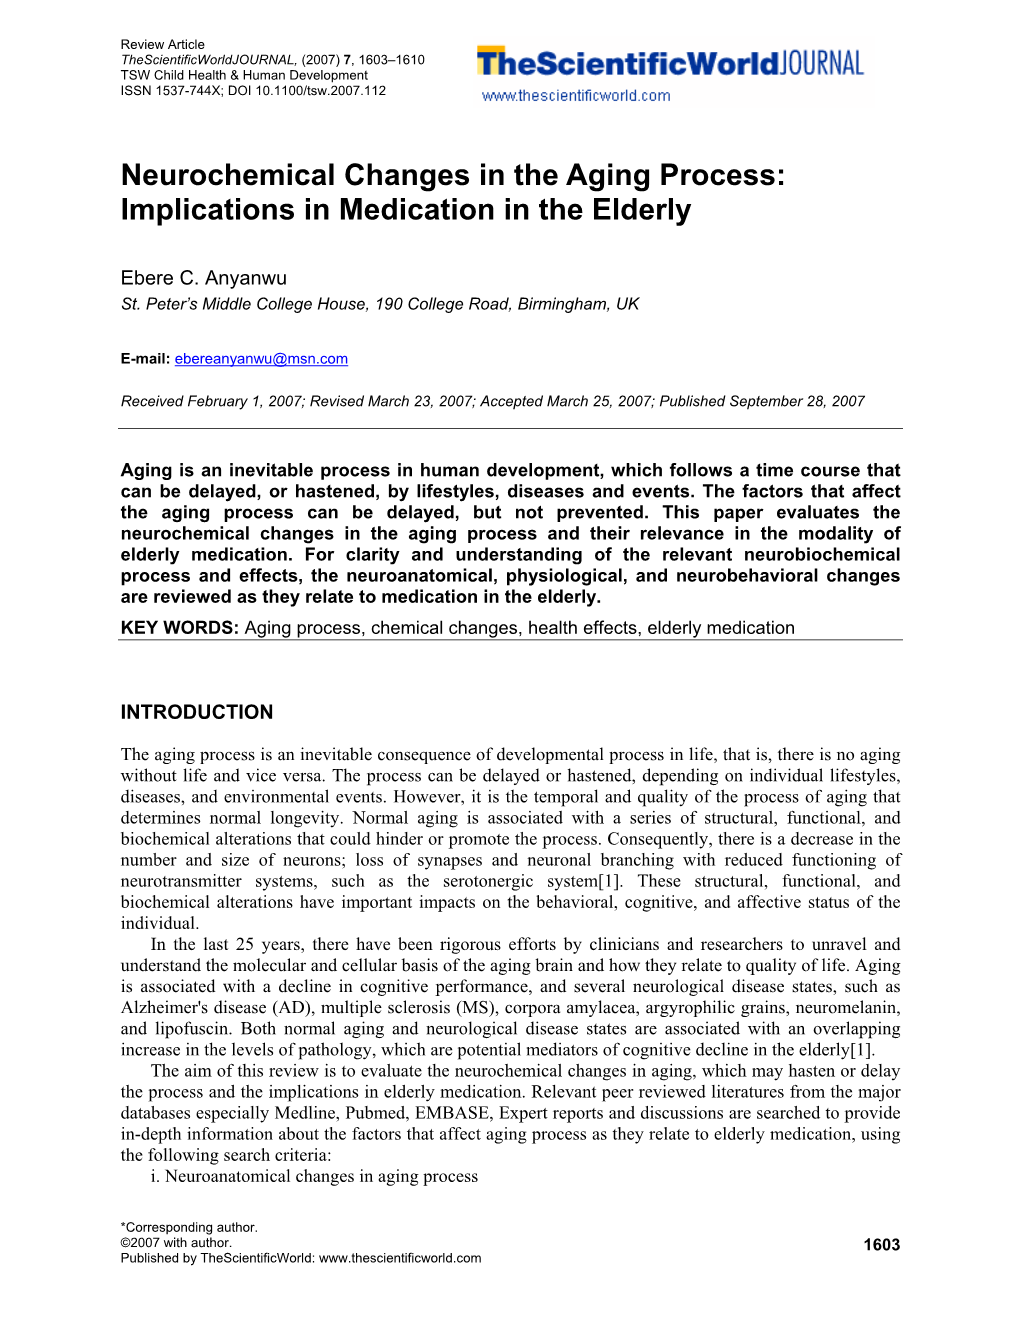 Neurochemical Changes in the Aging Process: Implications in Medication in the Elderly